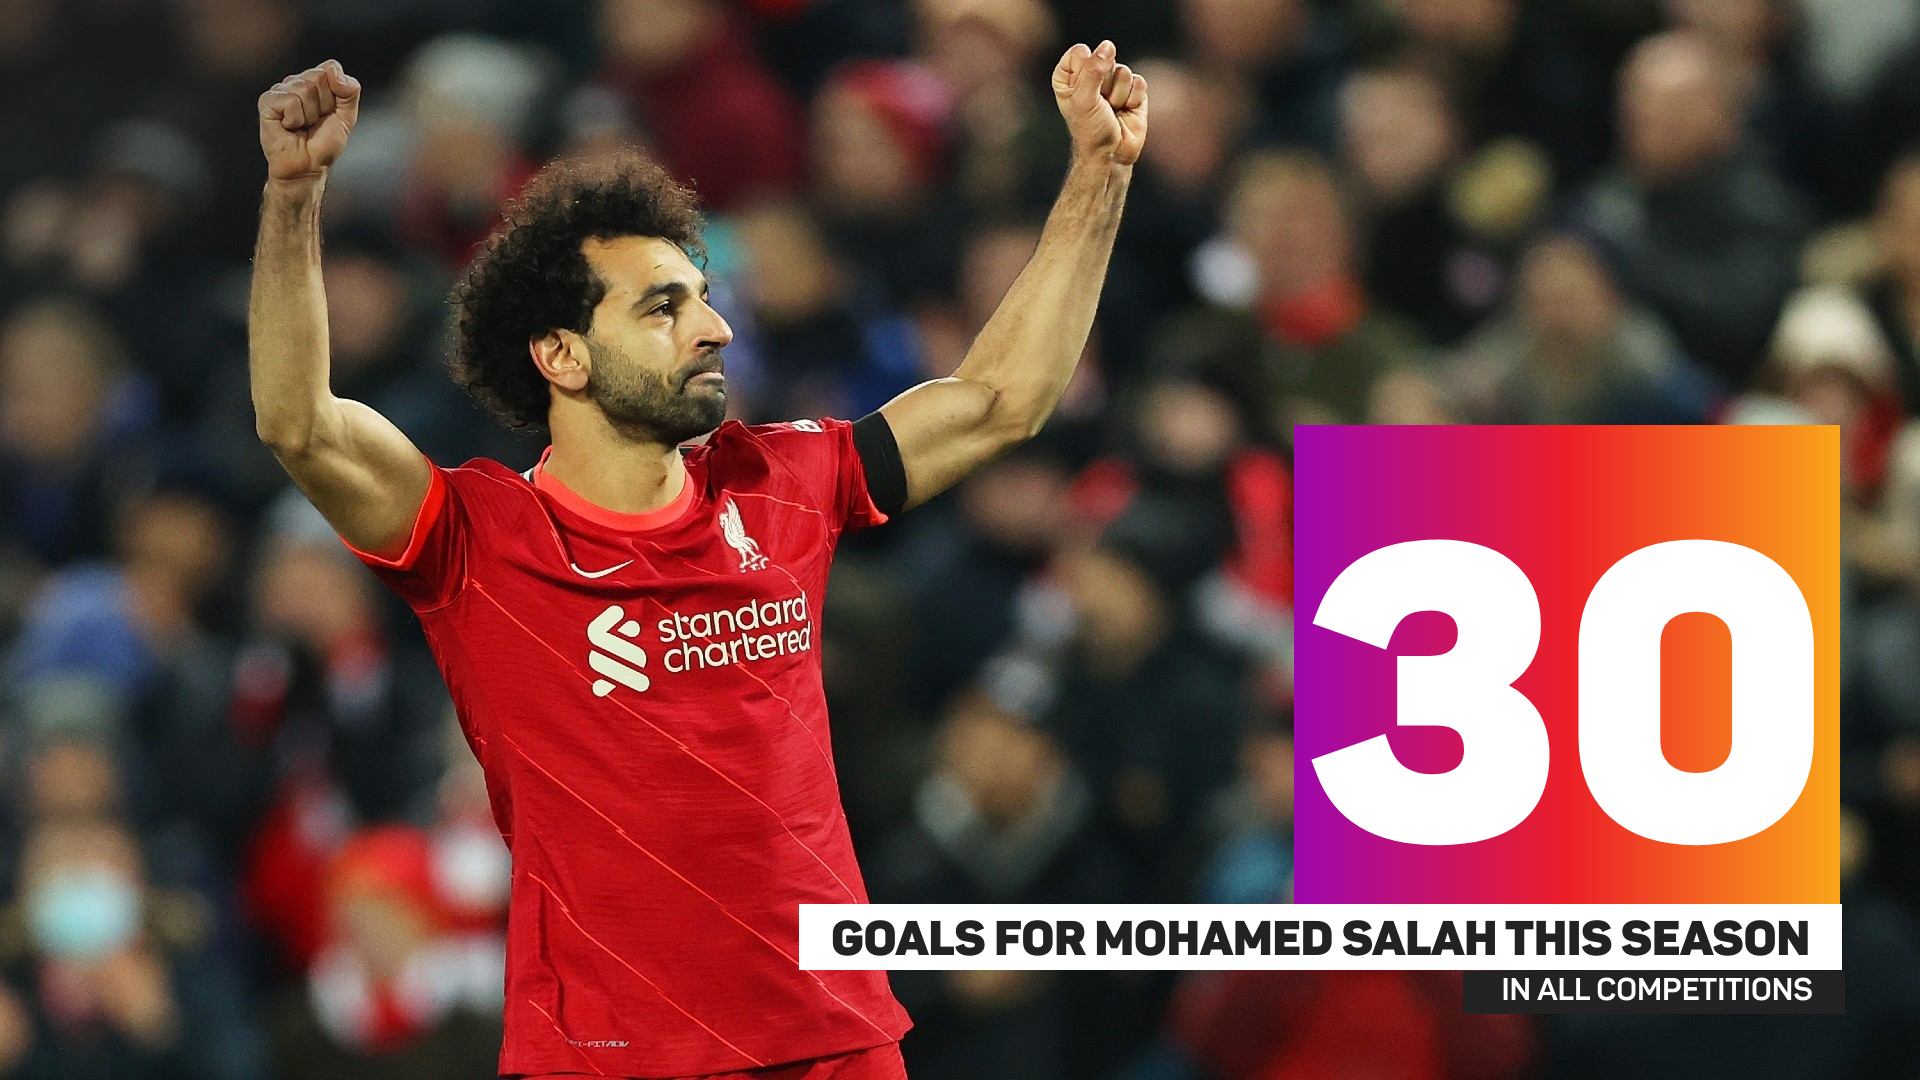 Mohamed Salah's scoring record in all competitions this season